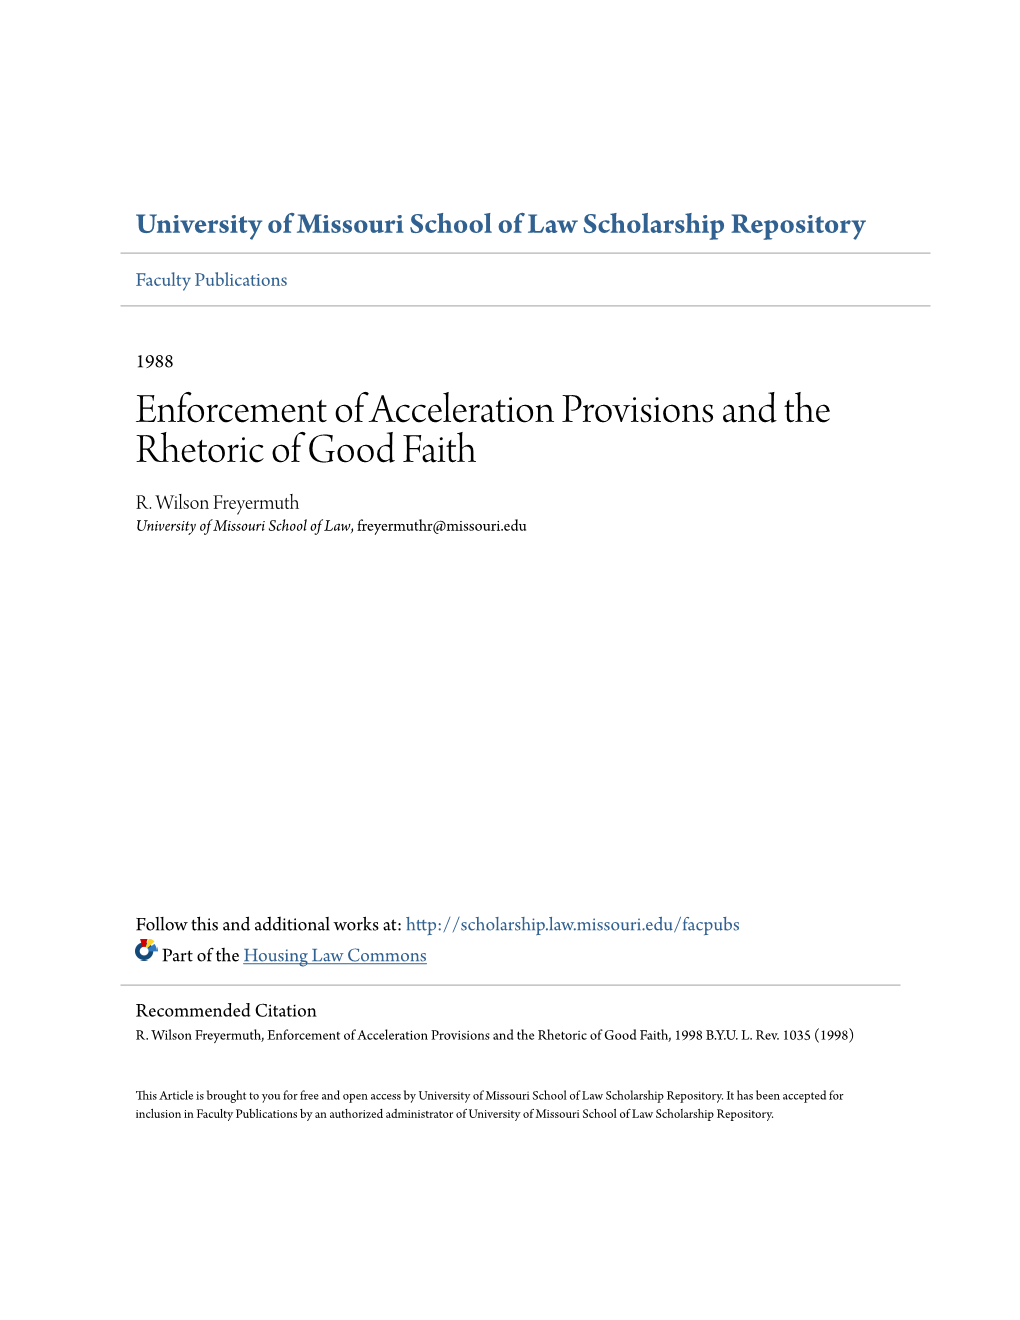 Enforcement of Acceleration Provisions and the Rhetoric of Good Faith R